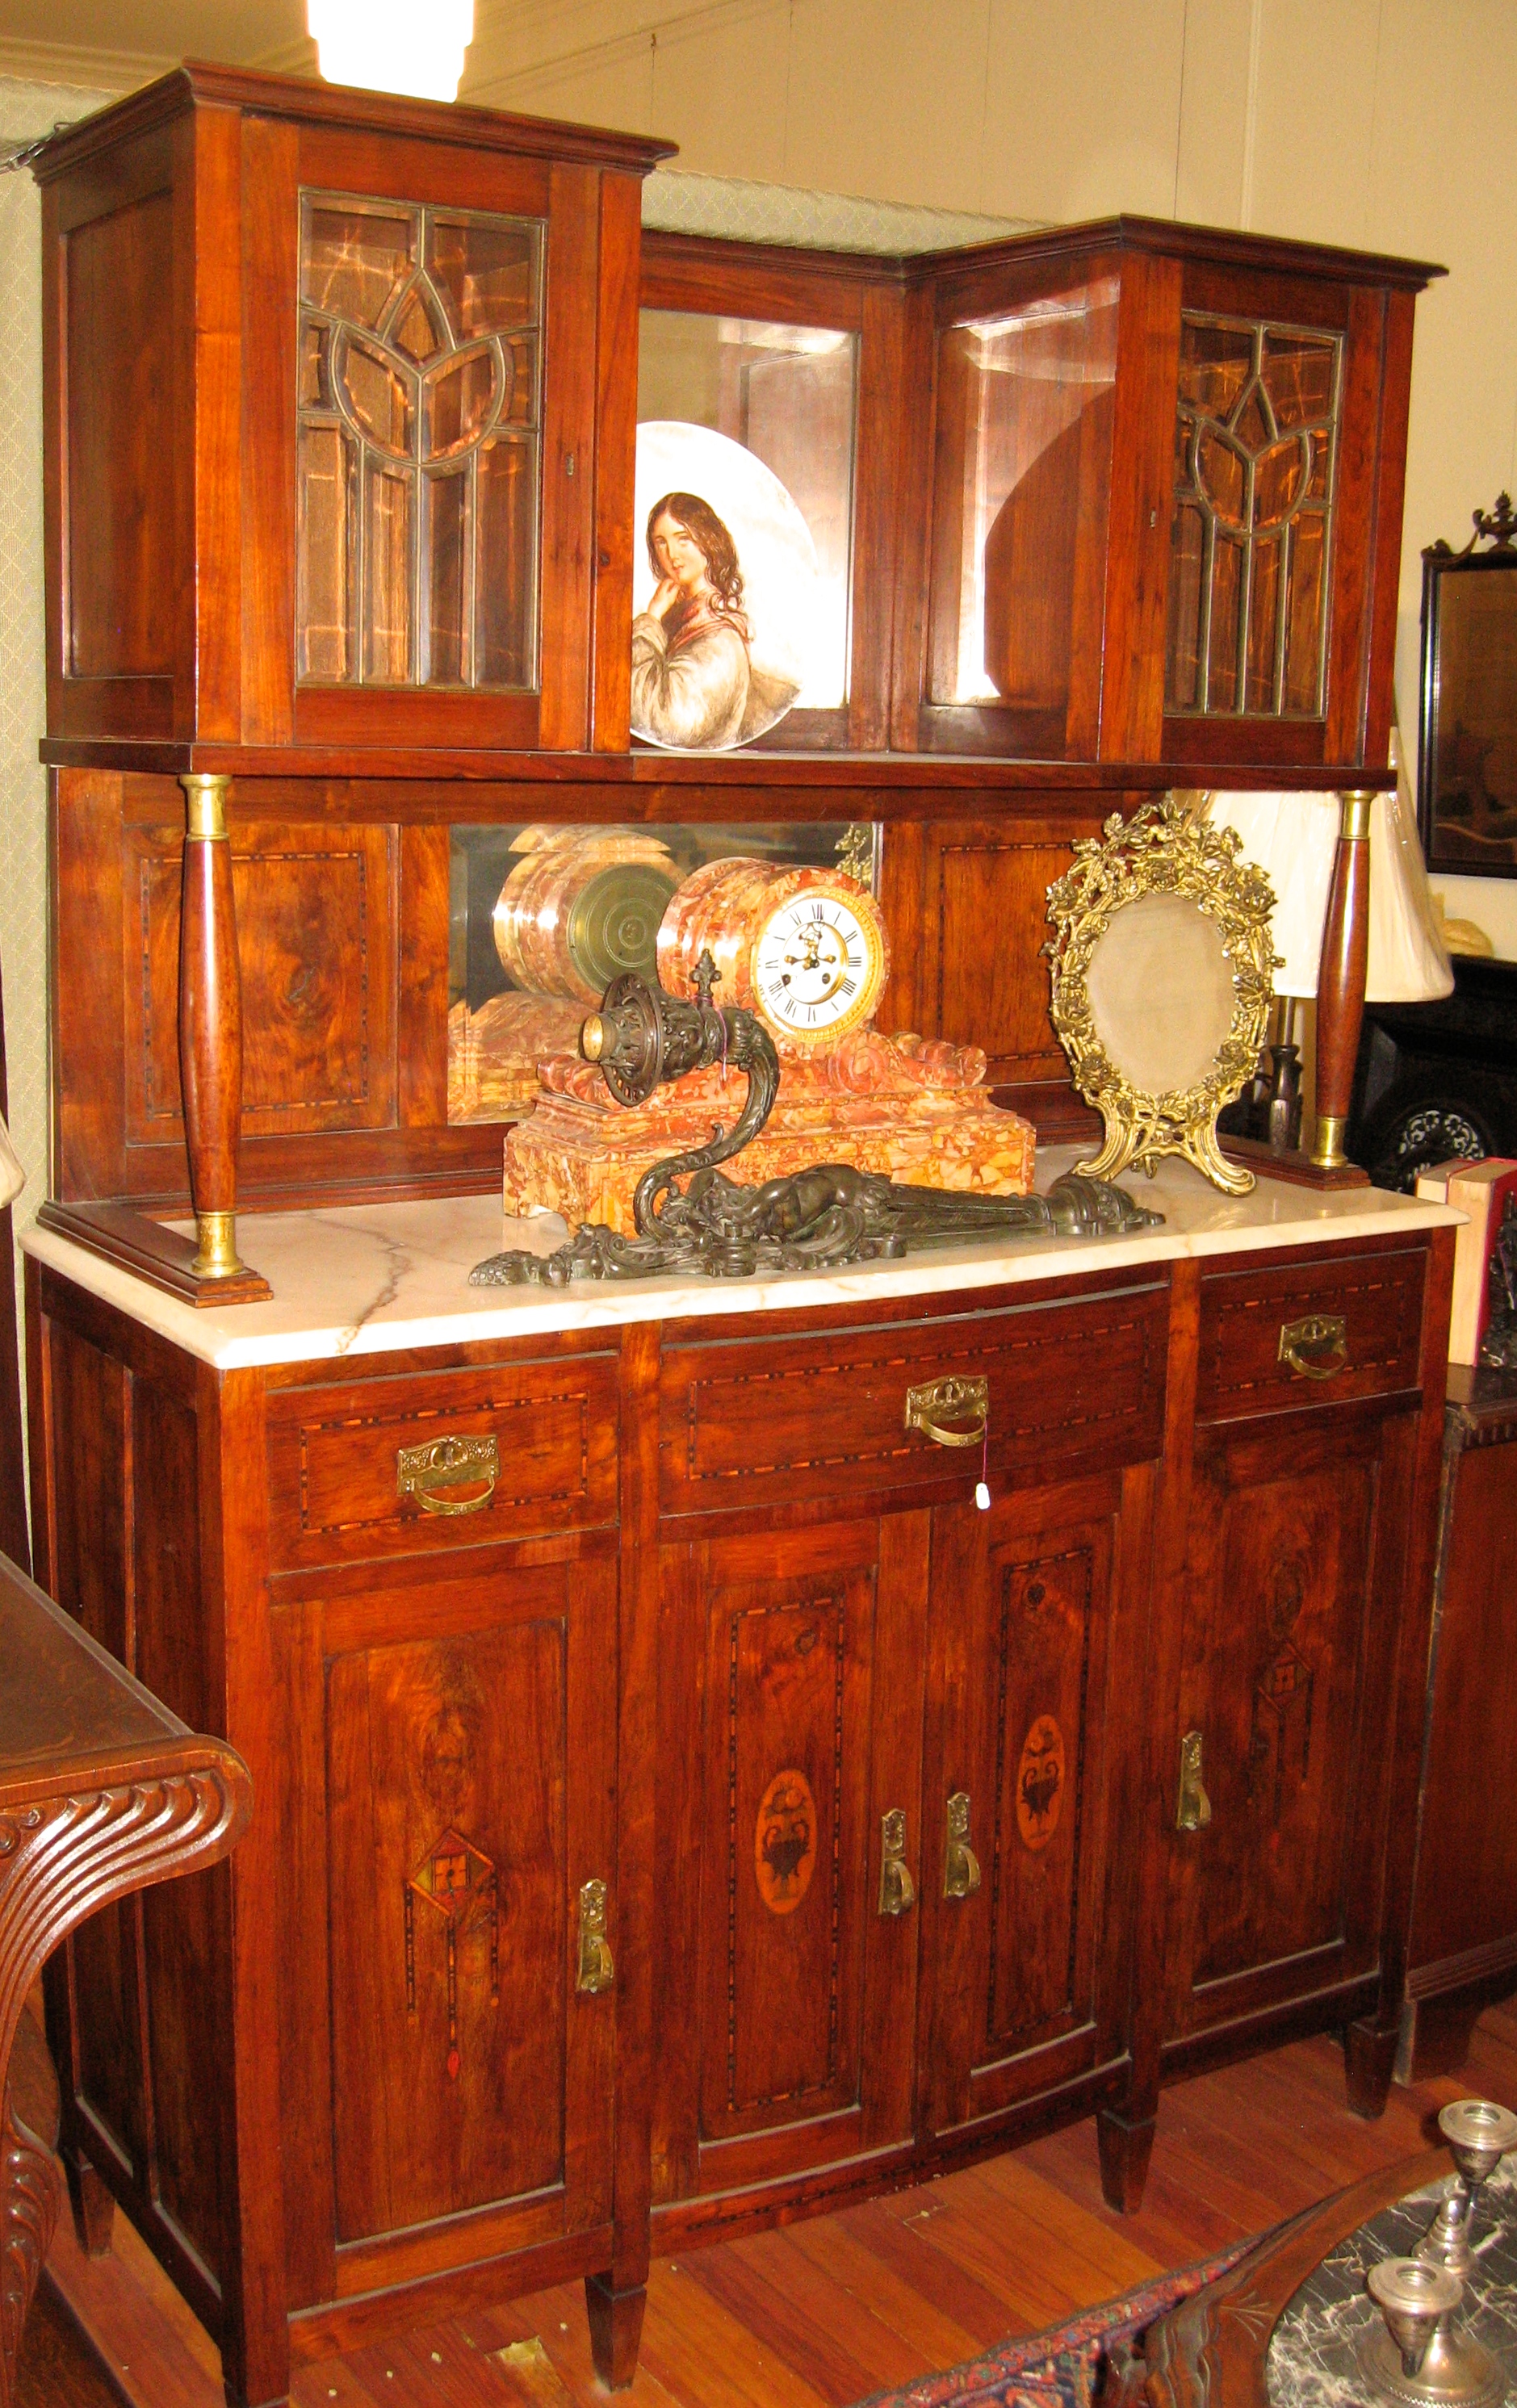 19th Century French Art Nouveau Sideboard/Cabinet w/ Leaded Beveled Glass Doors and Multiple Inlays (19" D x 52" W x  75" H)